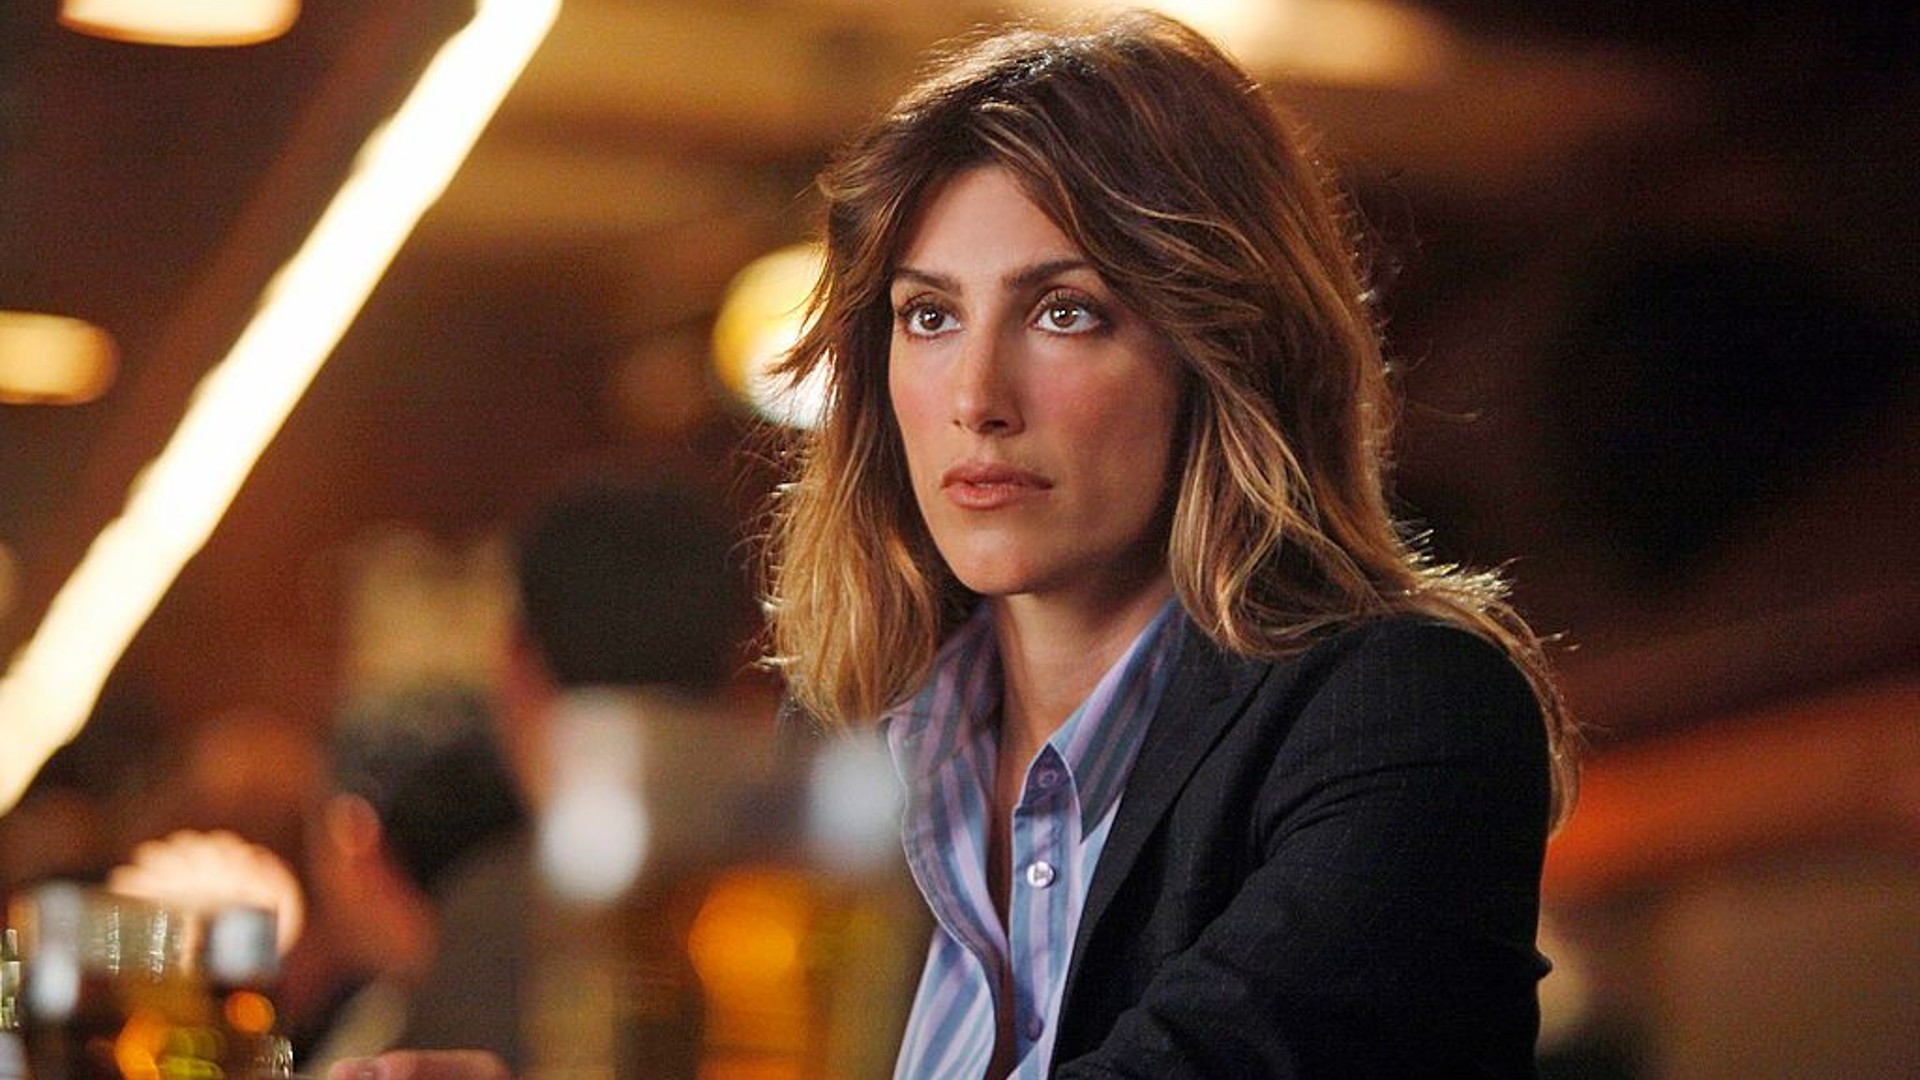 Behind the Scenes Blue Bloods Drama That Left Jennifer Esposito Out of Job